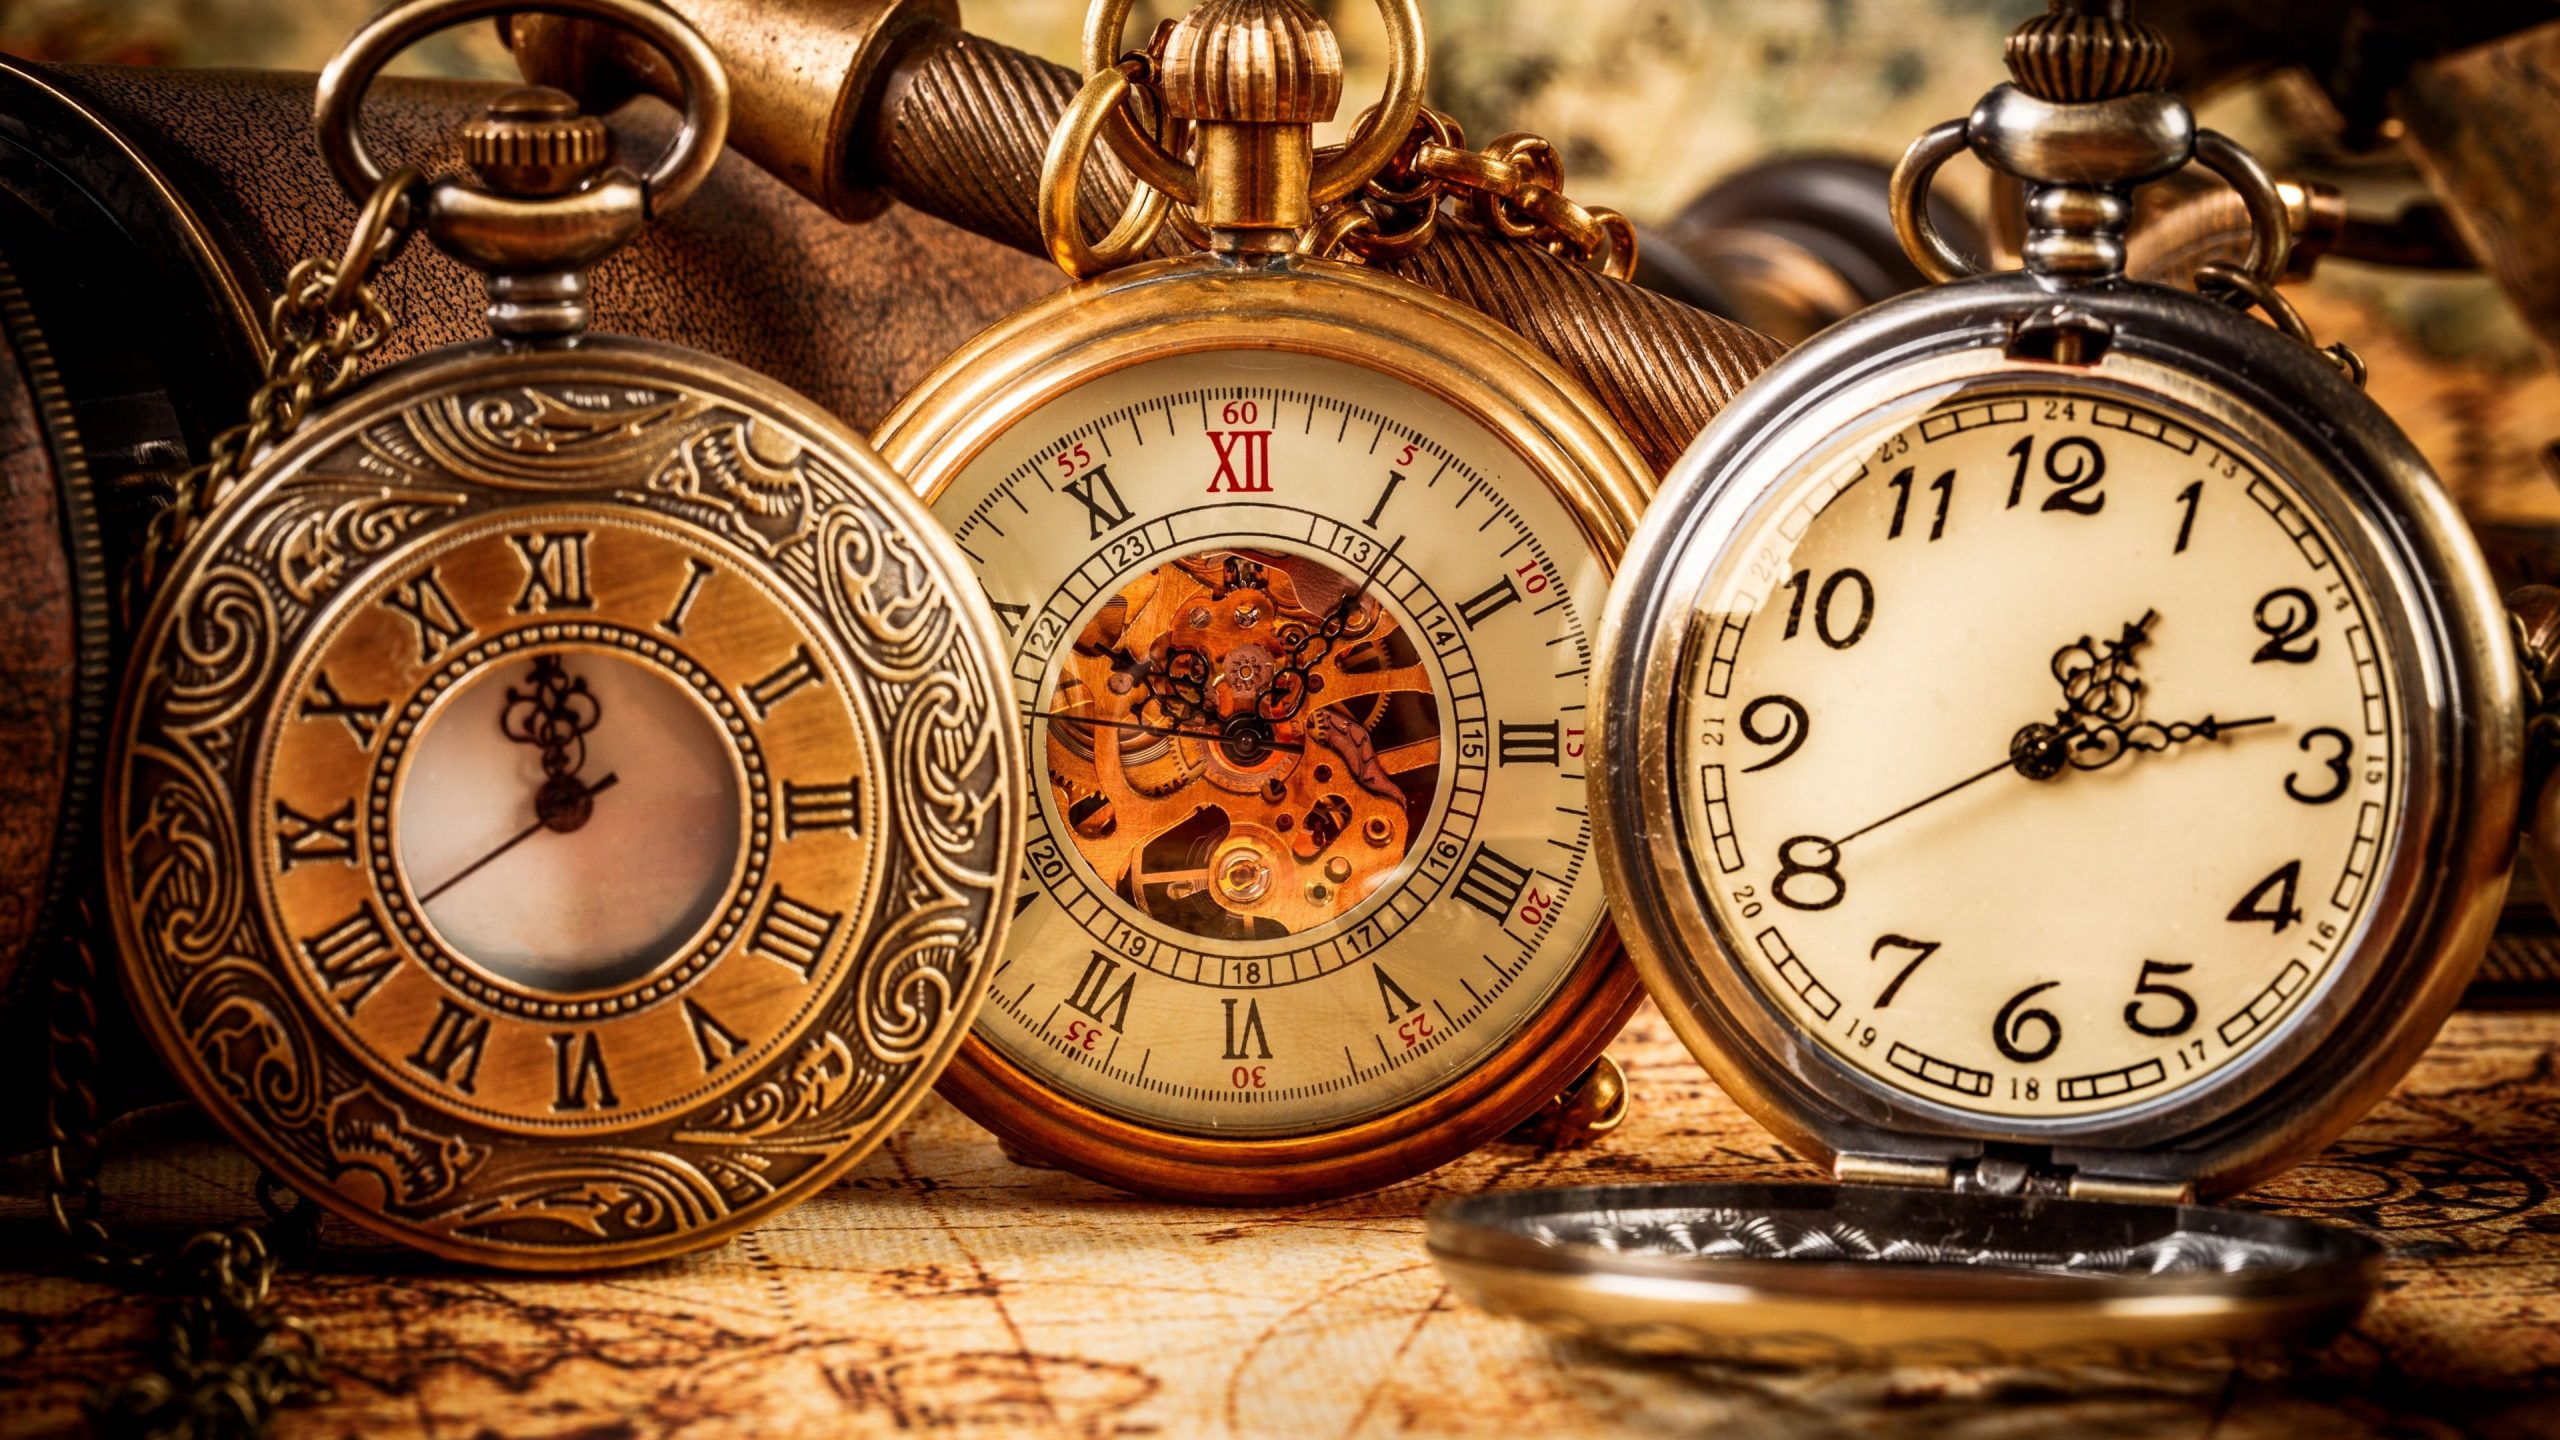 three silver-colored and gold-colored pocket watches, clocks wallpaper